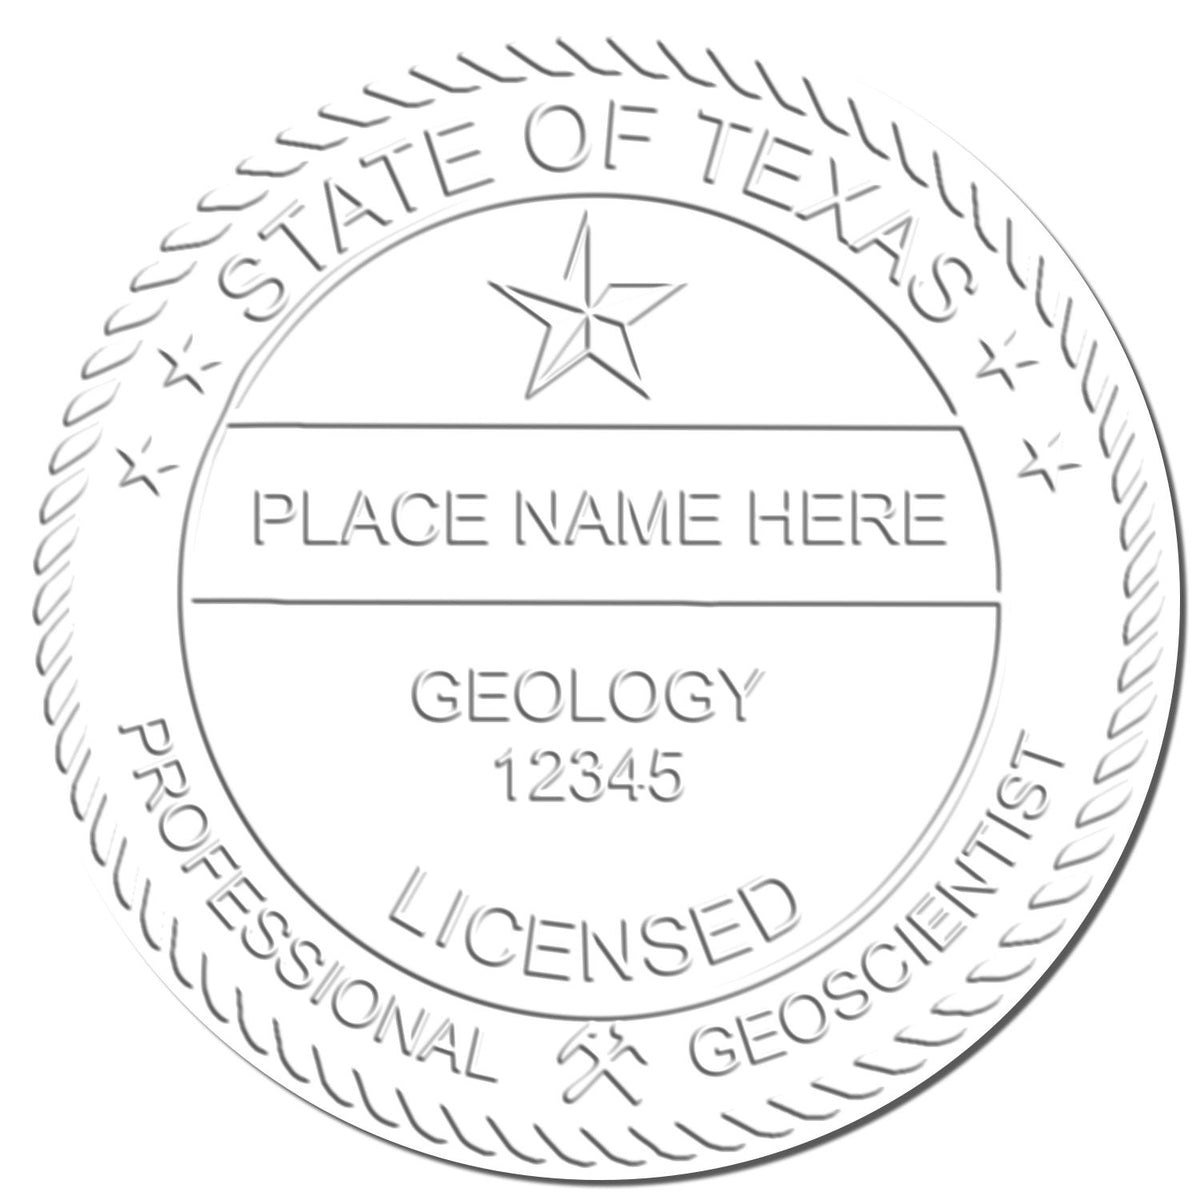 A stamped imprint of the Soft Texas Professional Geologist Seal in this stylish lifestyle photo, setting the tone for a unique and personalized product.